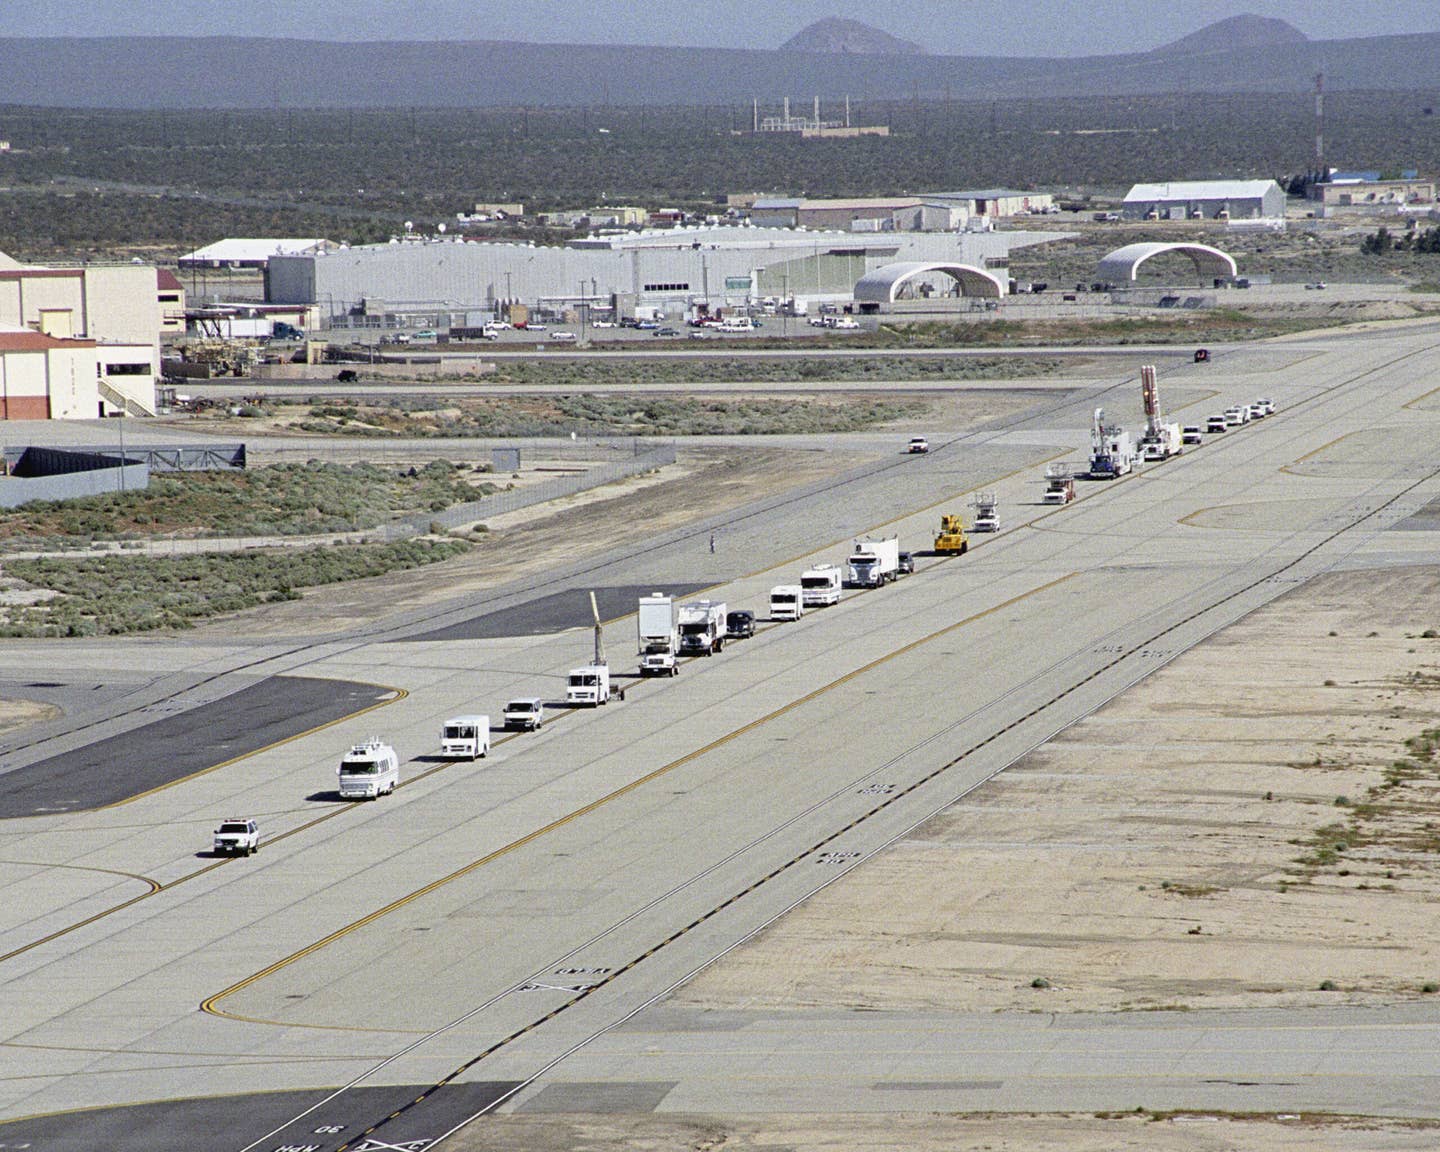 A long string of specialized NASA vehicles convoys down a taxiway at Edwards Air Force Base to begin a Space Shuttle rescue and recovery training exercise.